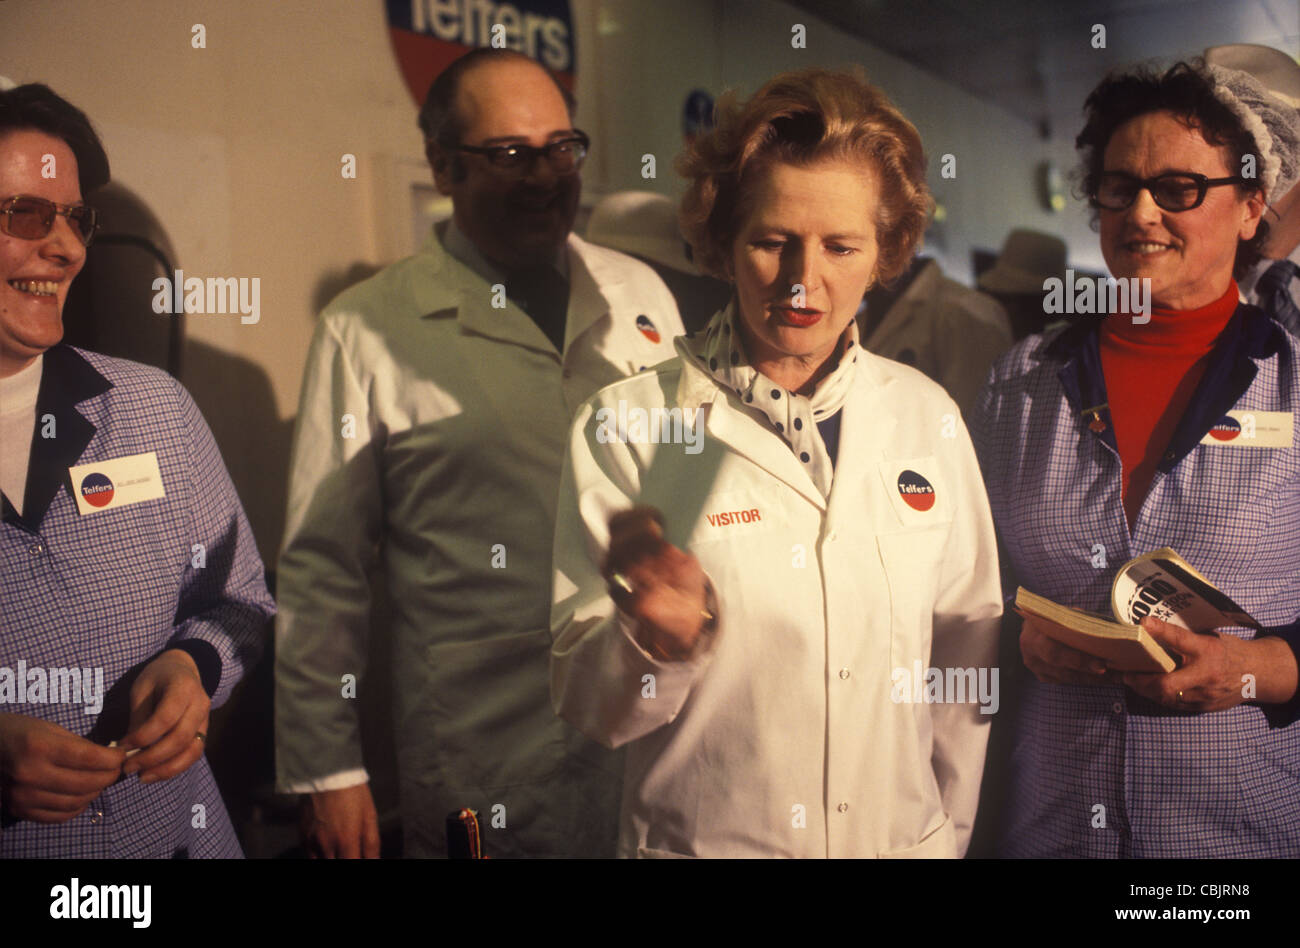 Maggie Margaret Thatcher on factory visit to Telfers meat pie factory during the 1978  campaigning  Northampton England. Preparing for the 1979 General Election. 1970s UK HOMER SYKES Stock Photo